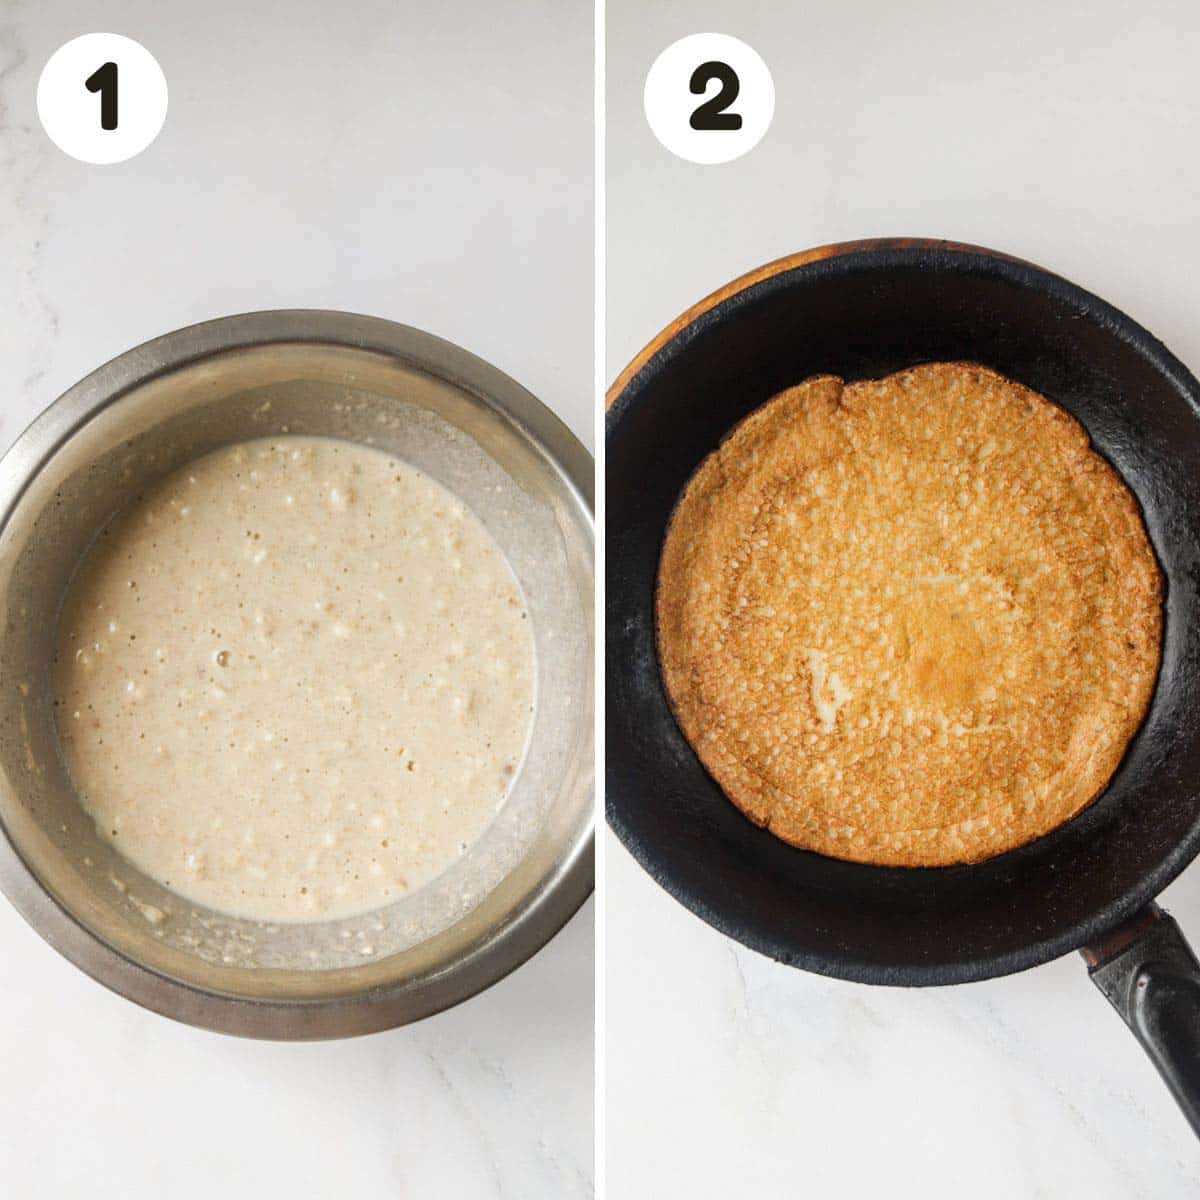 Steps to make the pancakes.